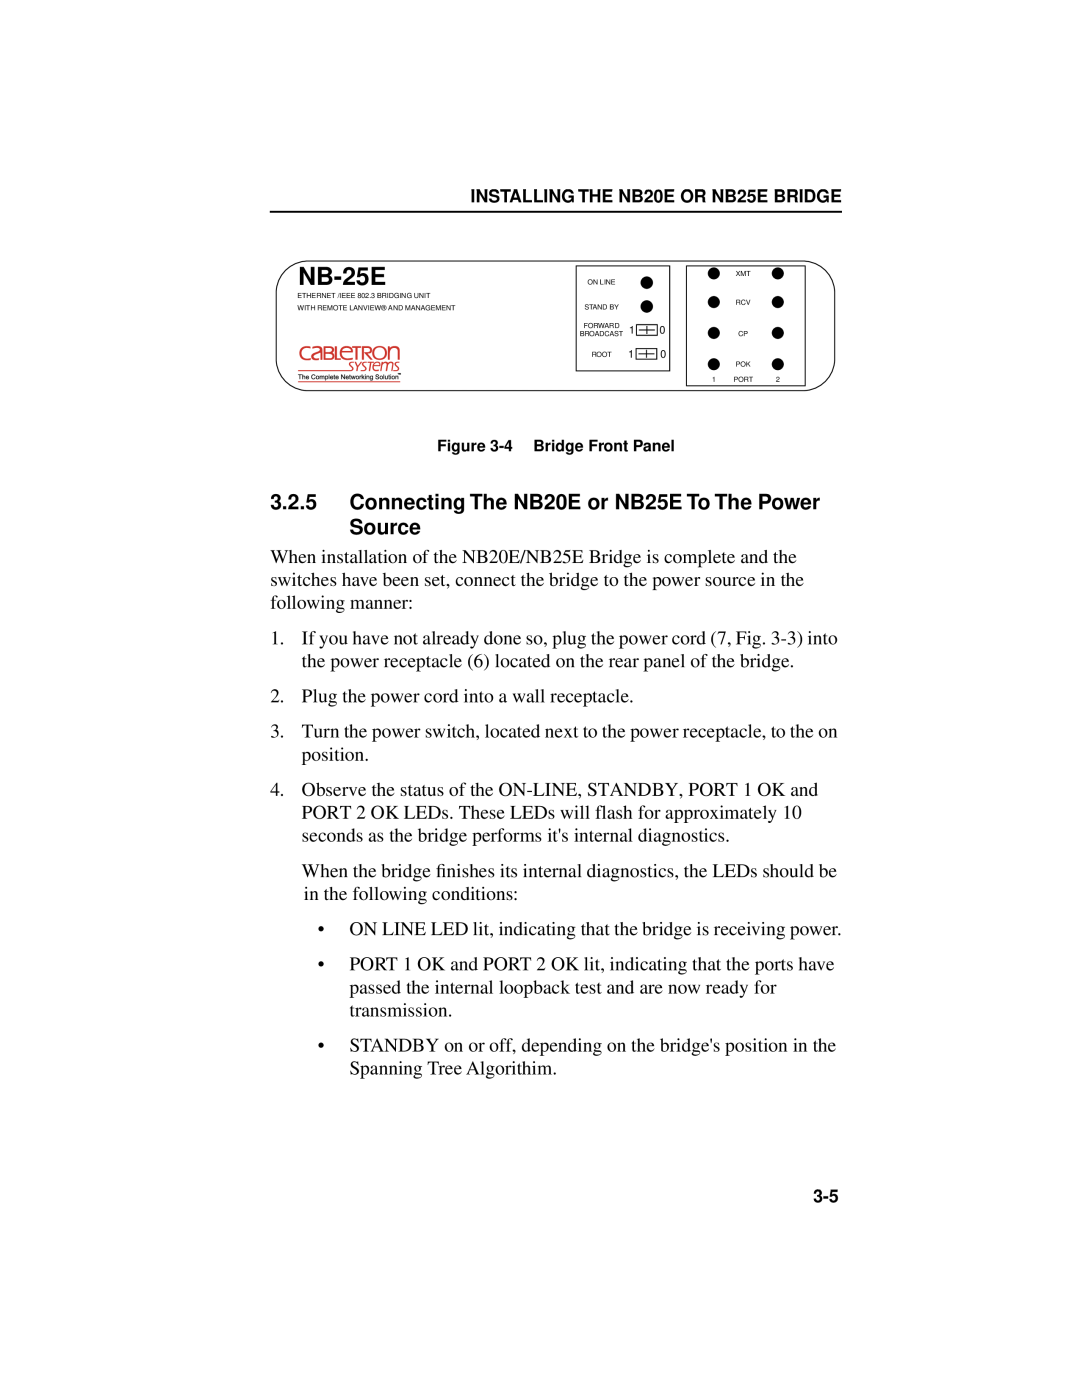 Cabletron Systems NB25 E user manual NB-25E, Connecting The NB20E or NB25E To The Power Source 